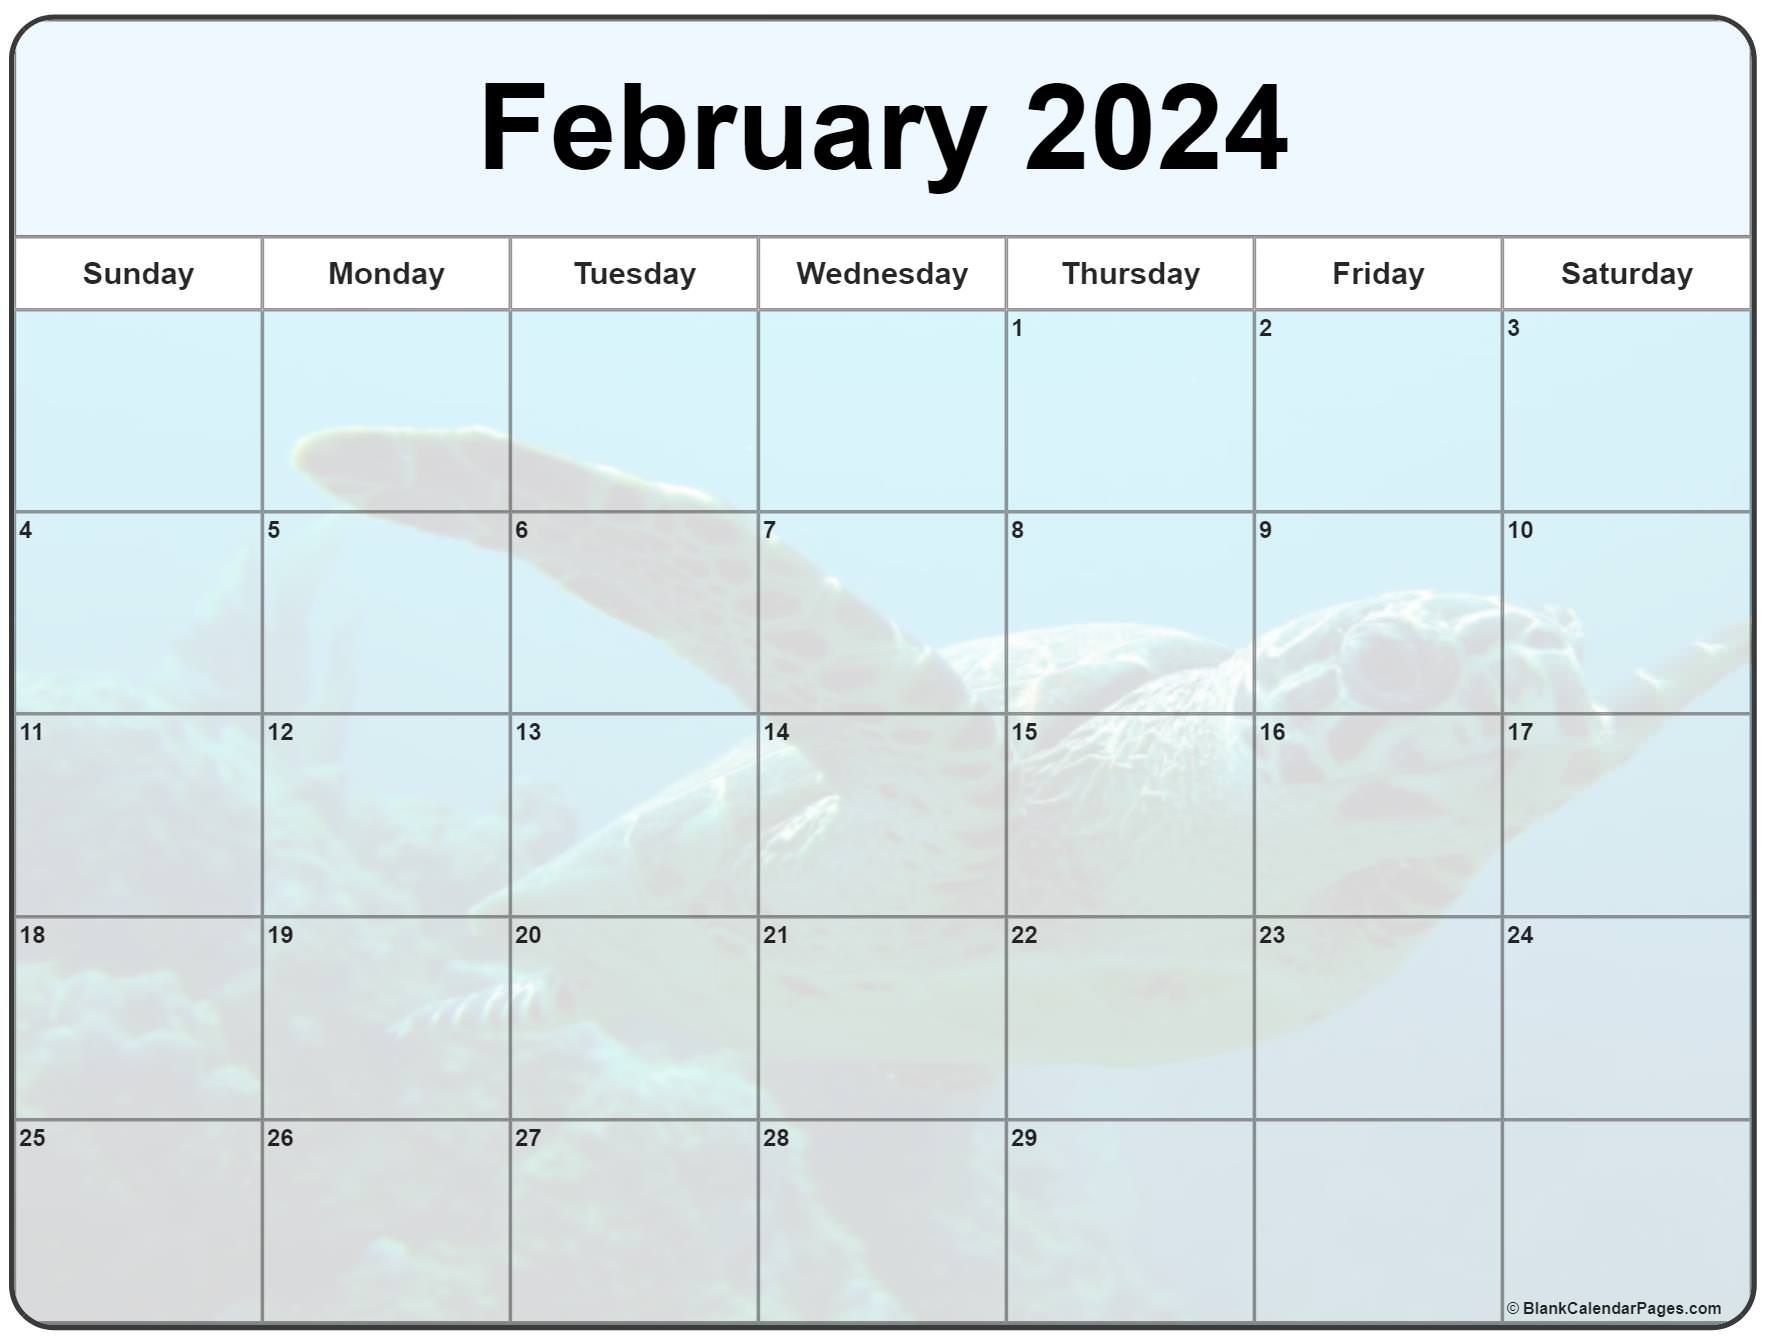 Collection of February 2024 photo calendars with image filters.